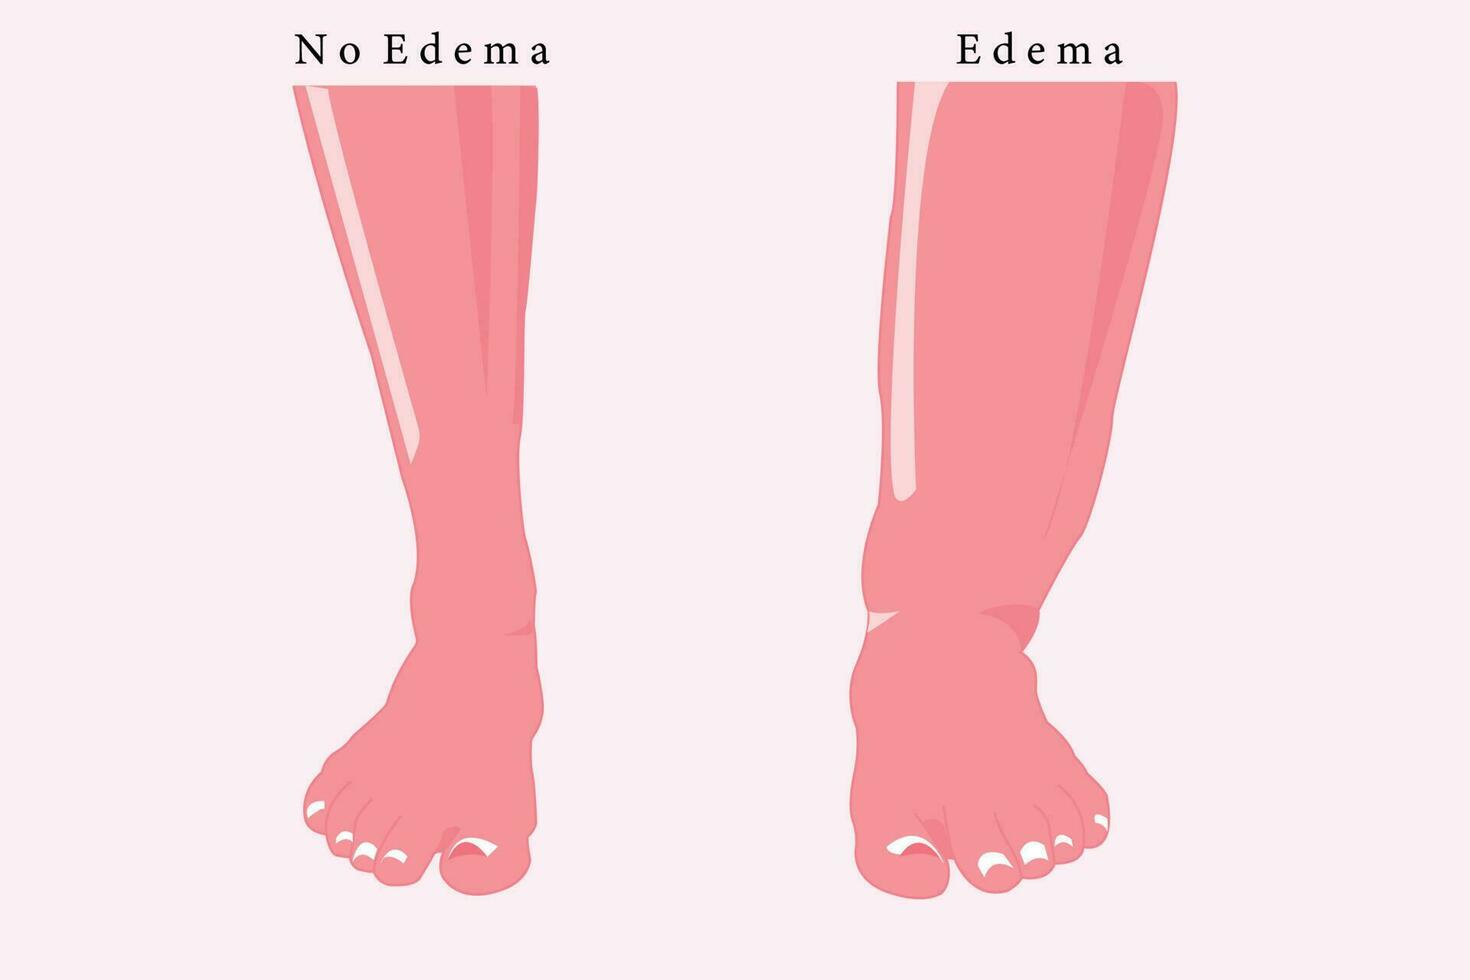 comparation of normal foot and edema foot, flat illustration for education. eps 10 vector